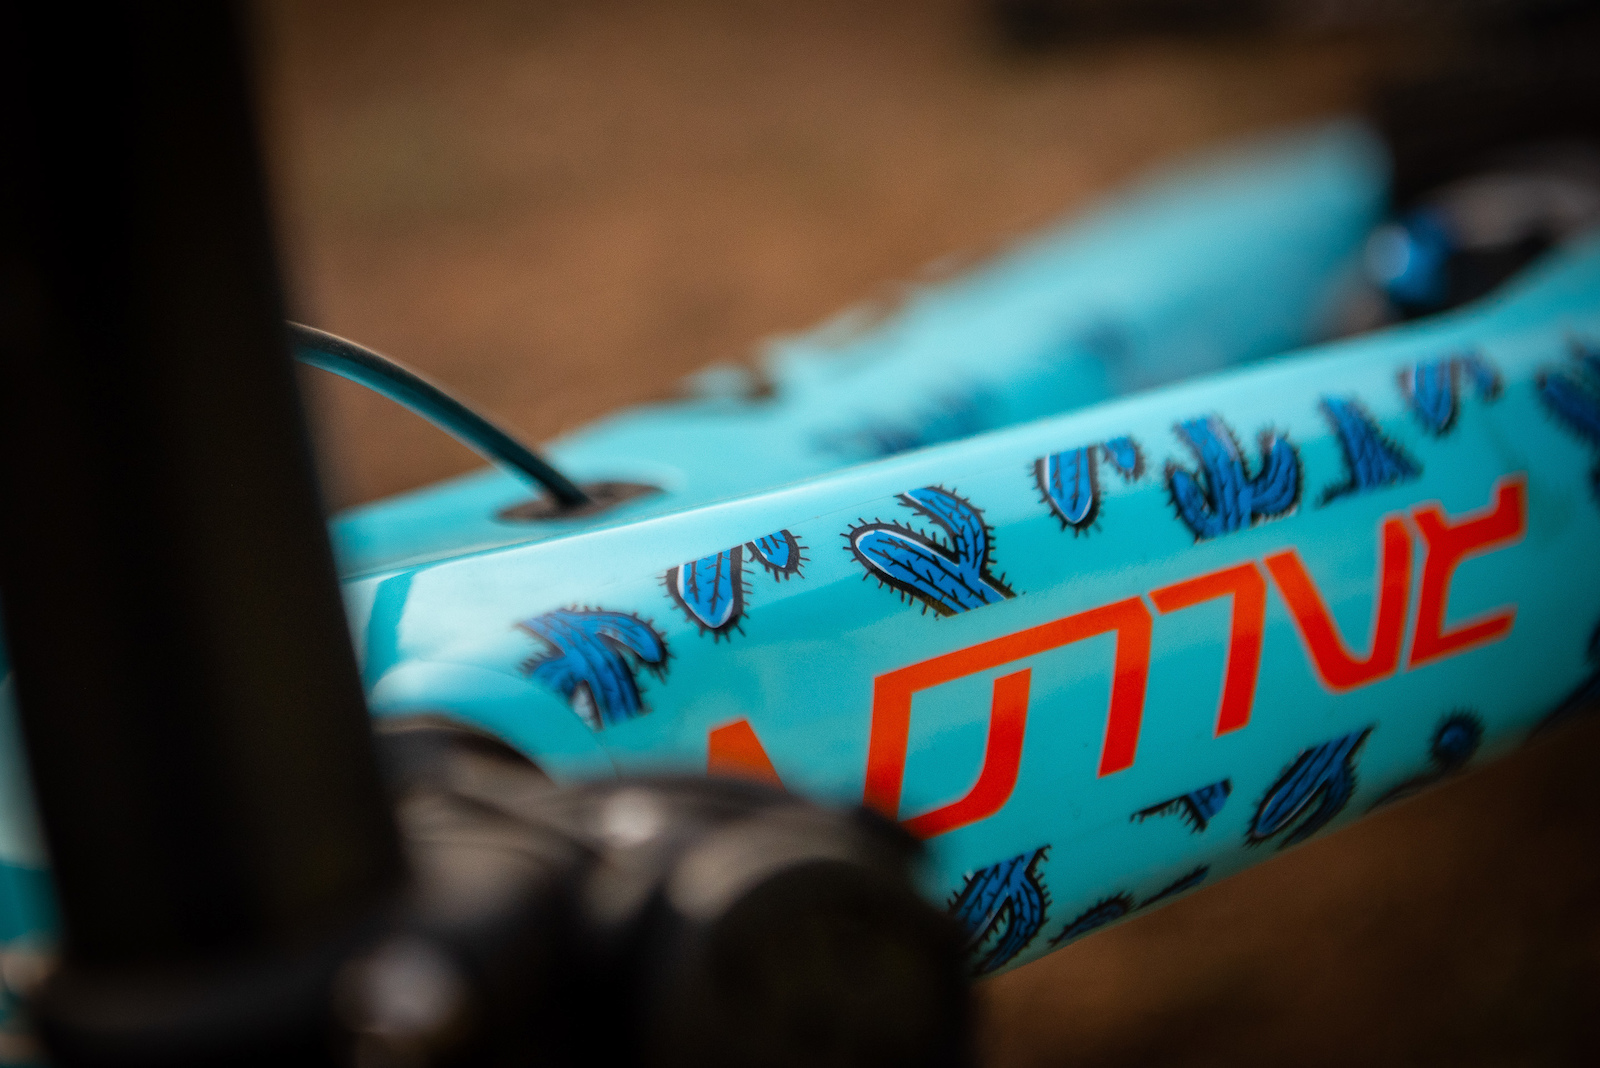 Custom top tube decals seem to be the new in thing this year.